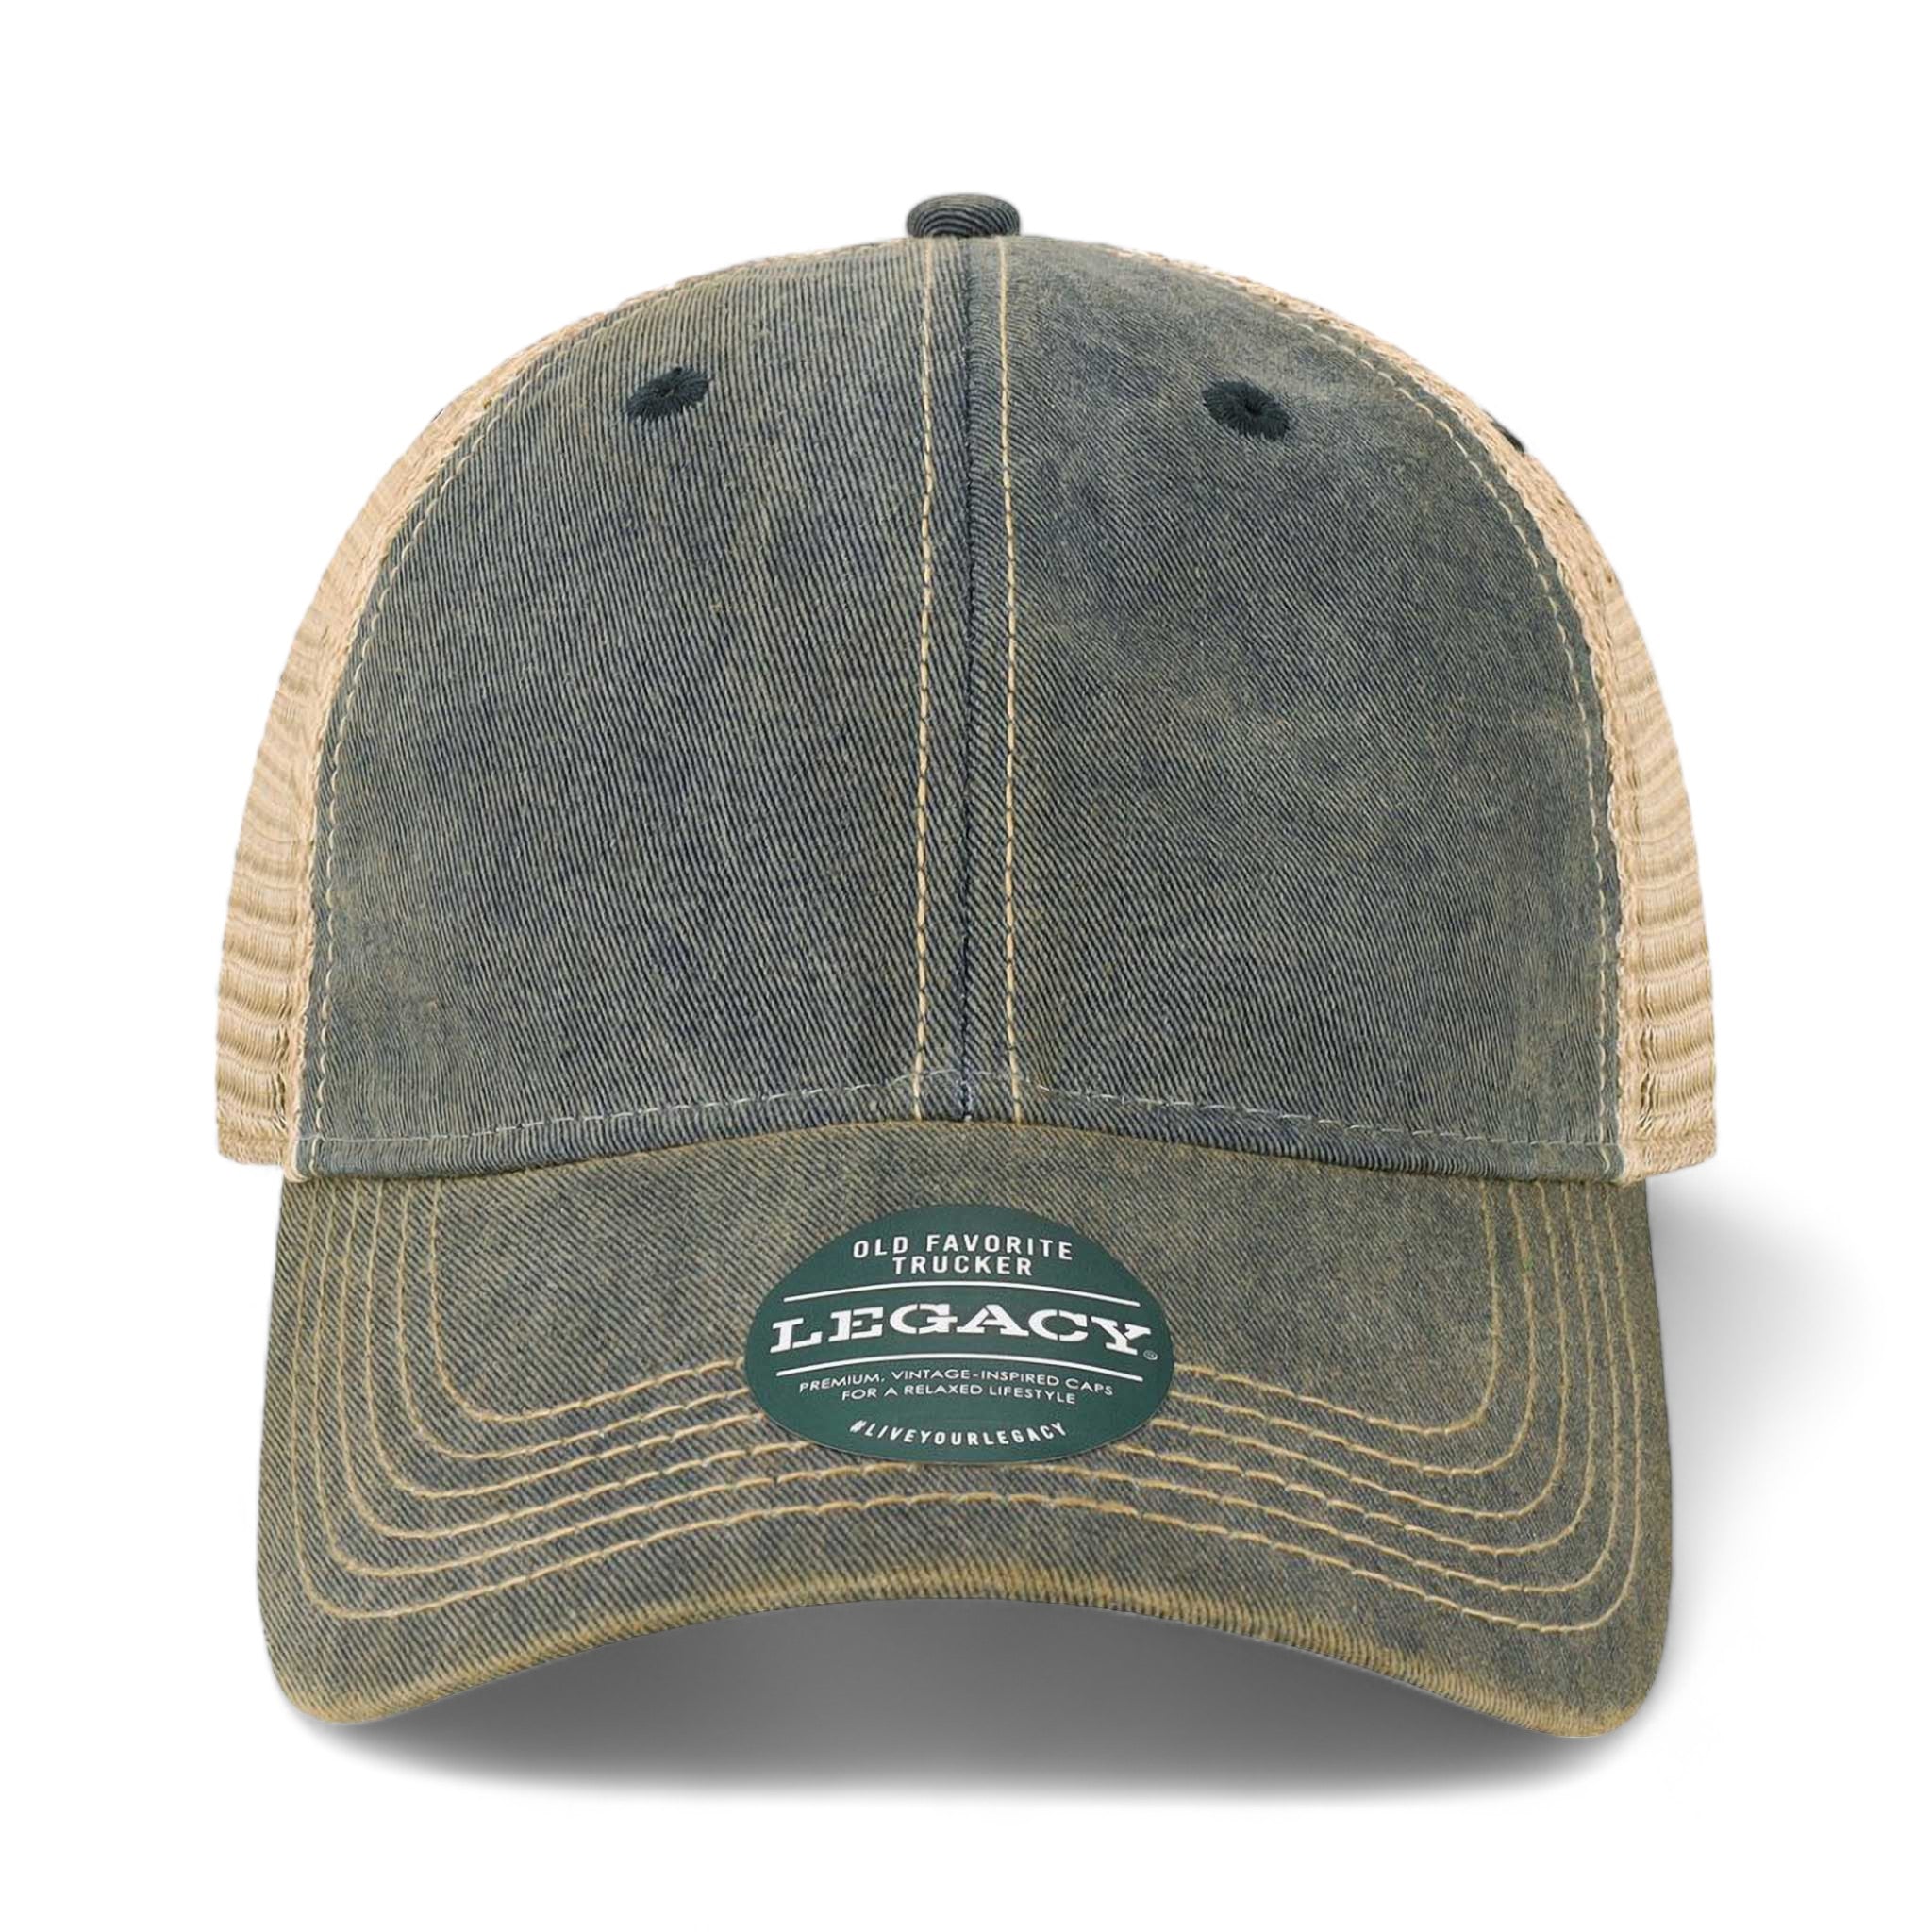 Front view of LEGACY OFAY custom hat in navy and khaki